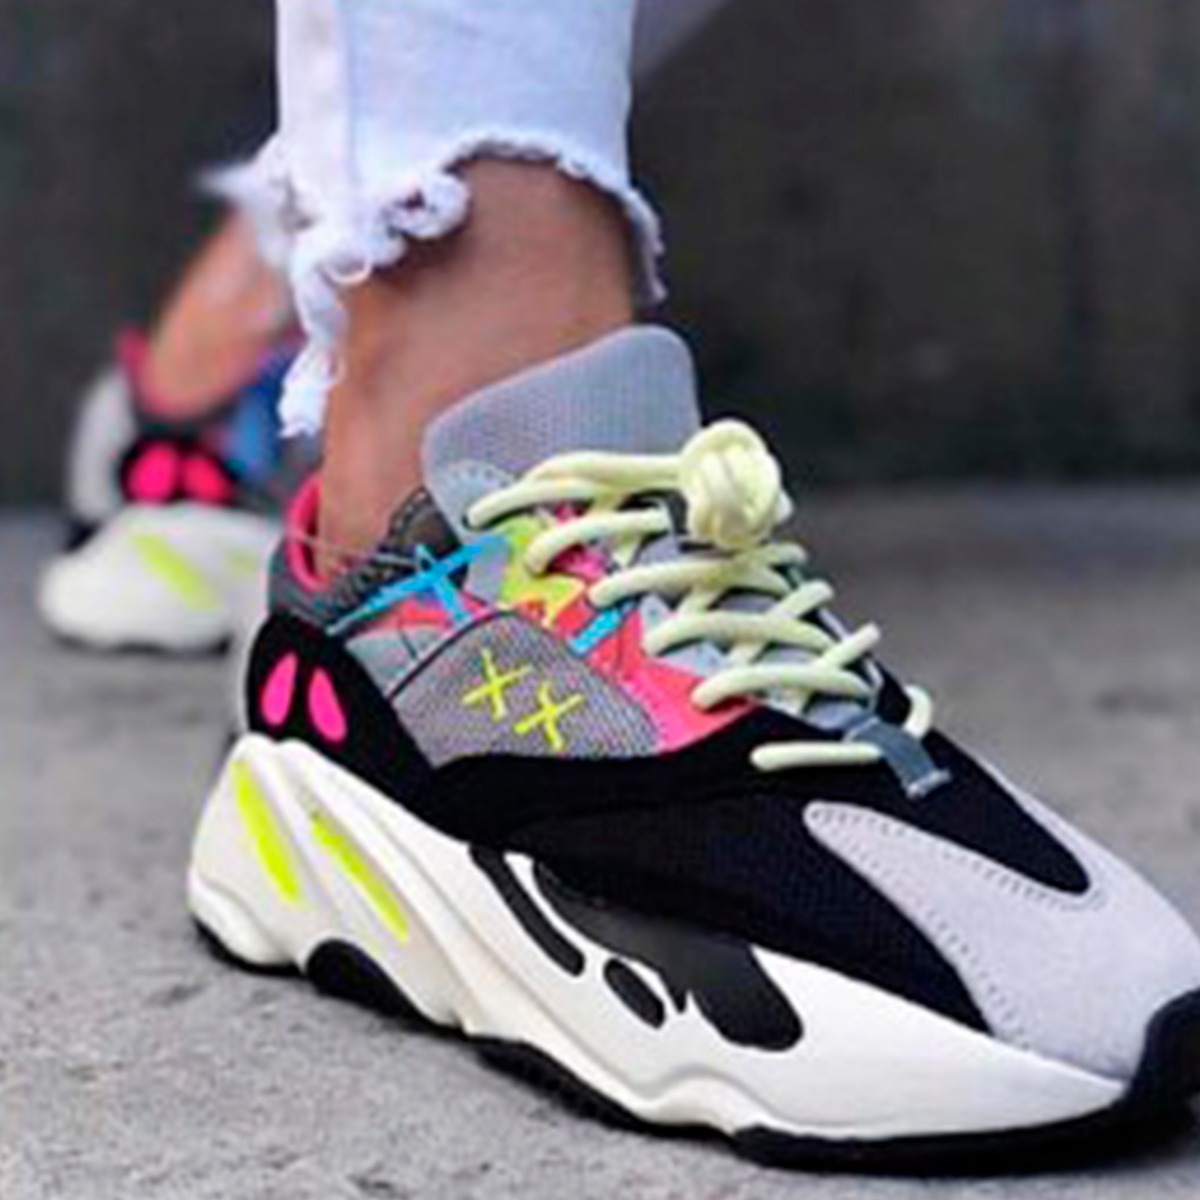 adidas yeezy boost 700 mujer